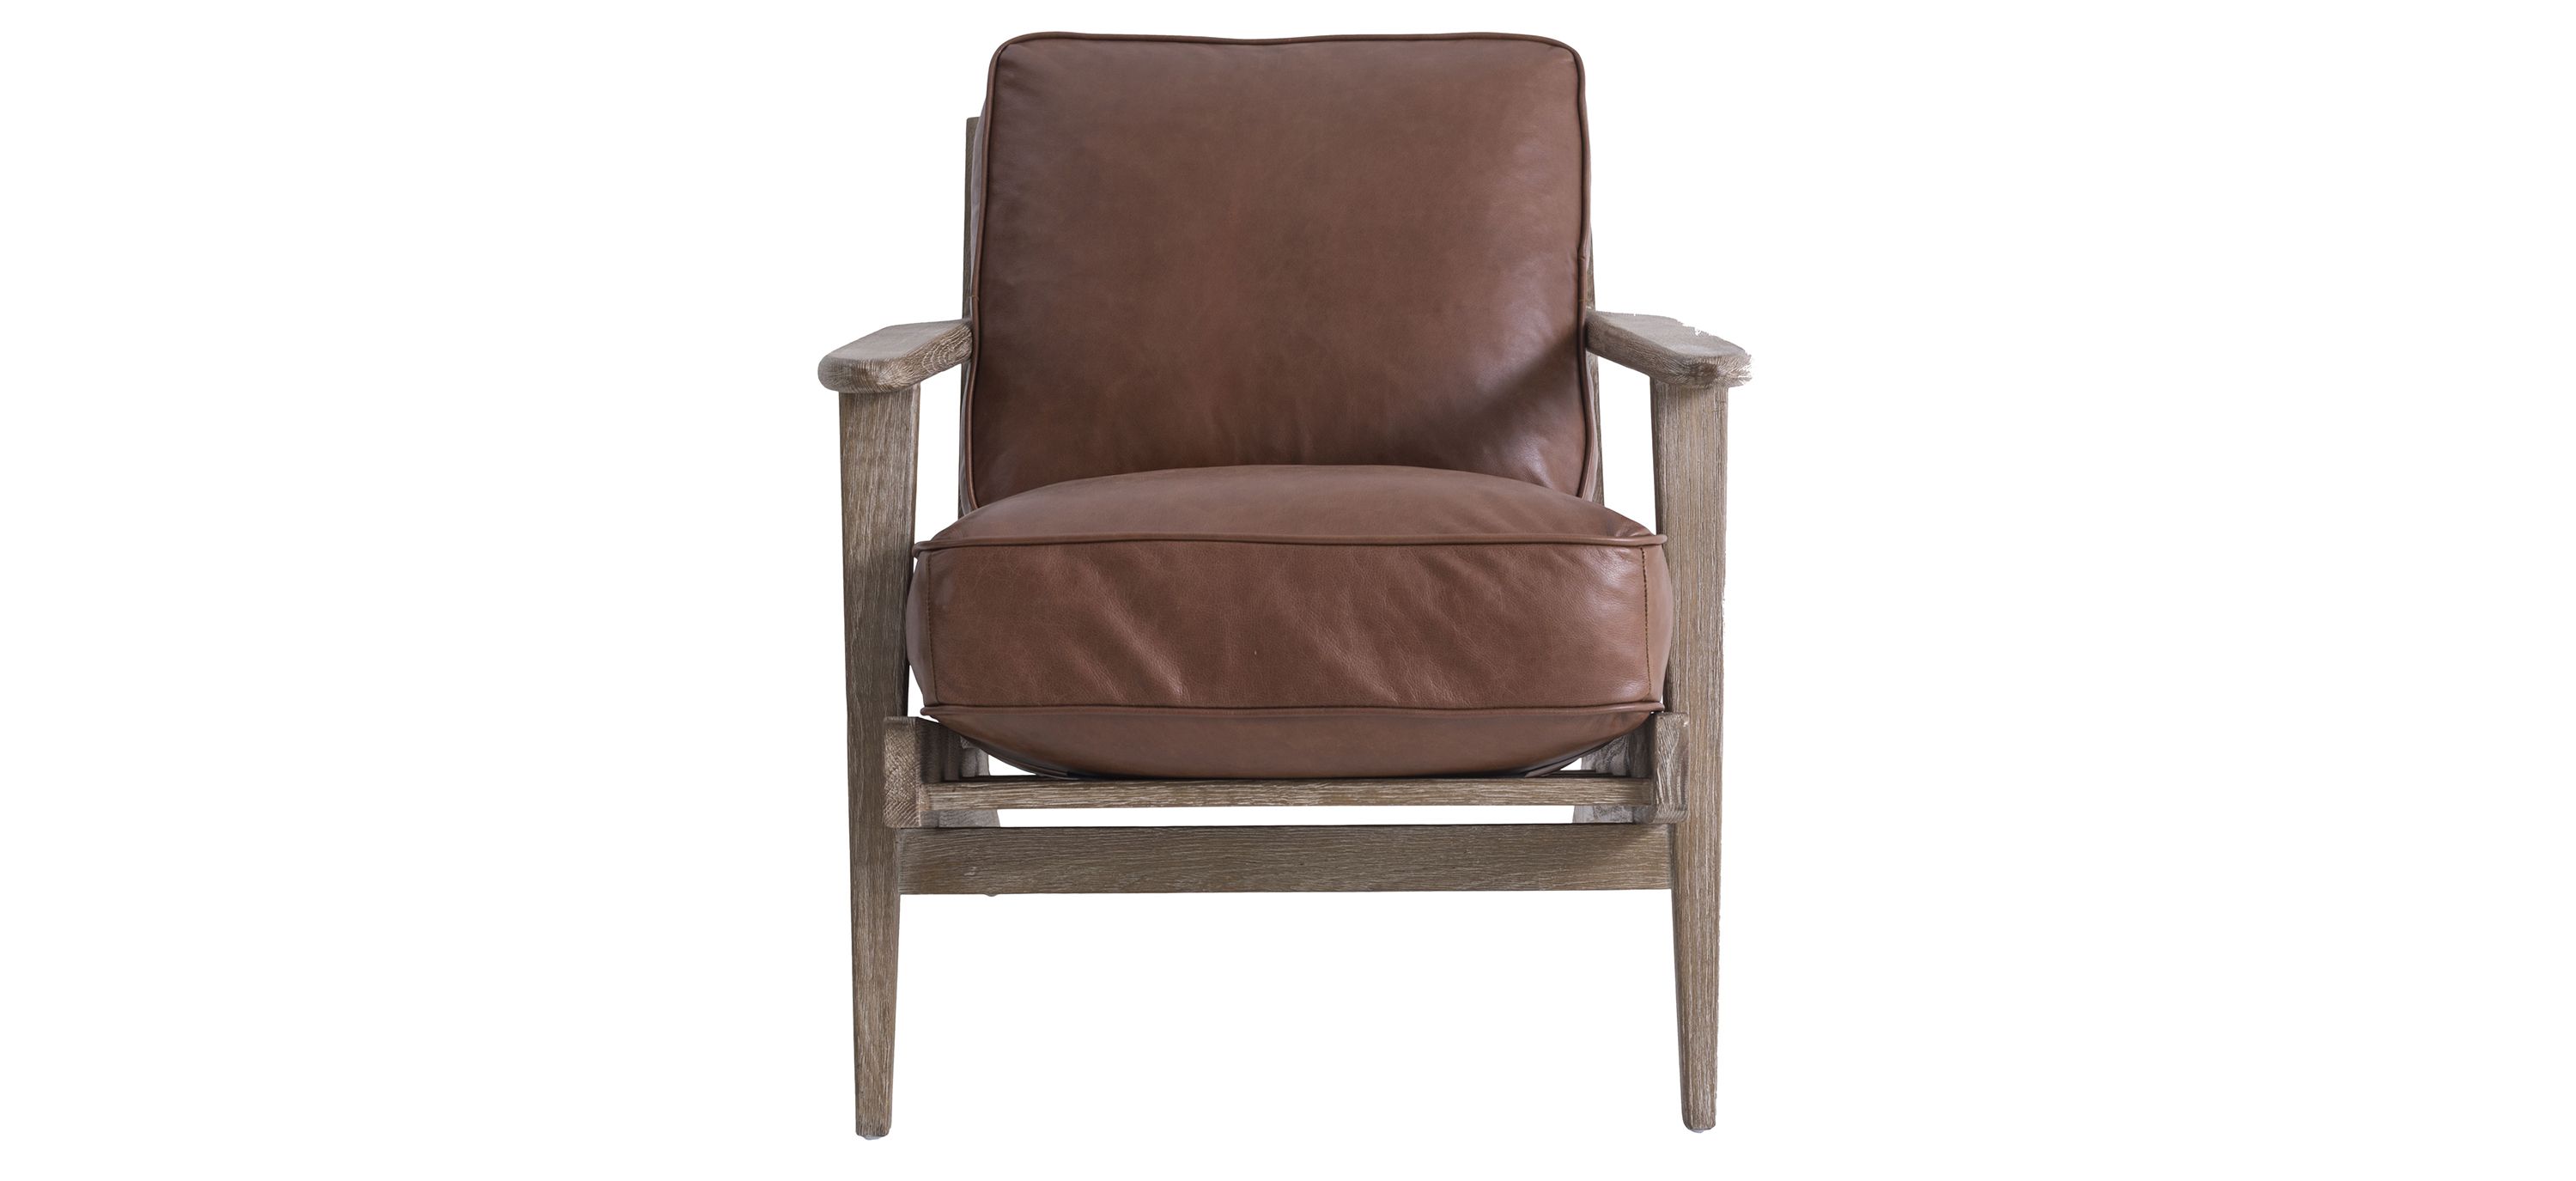 Yale Leather Arm Chair